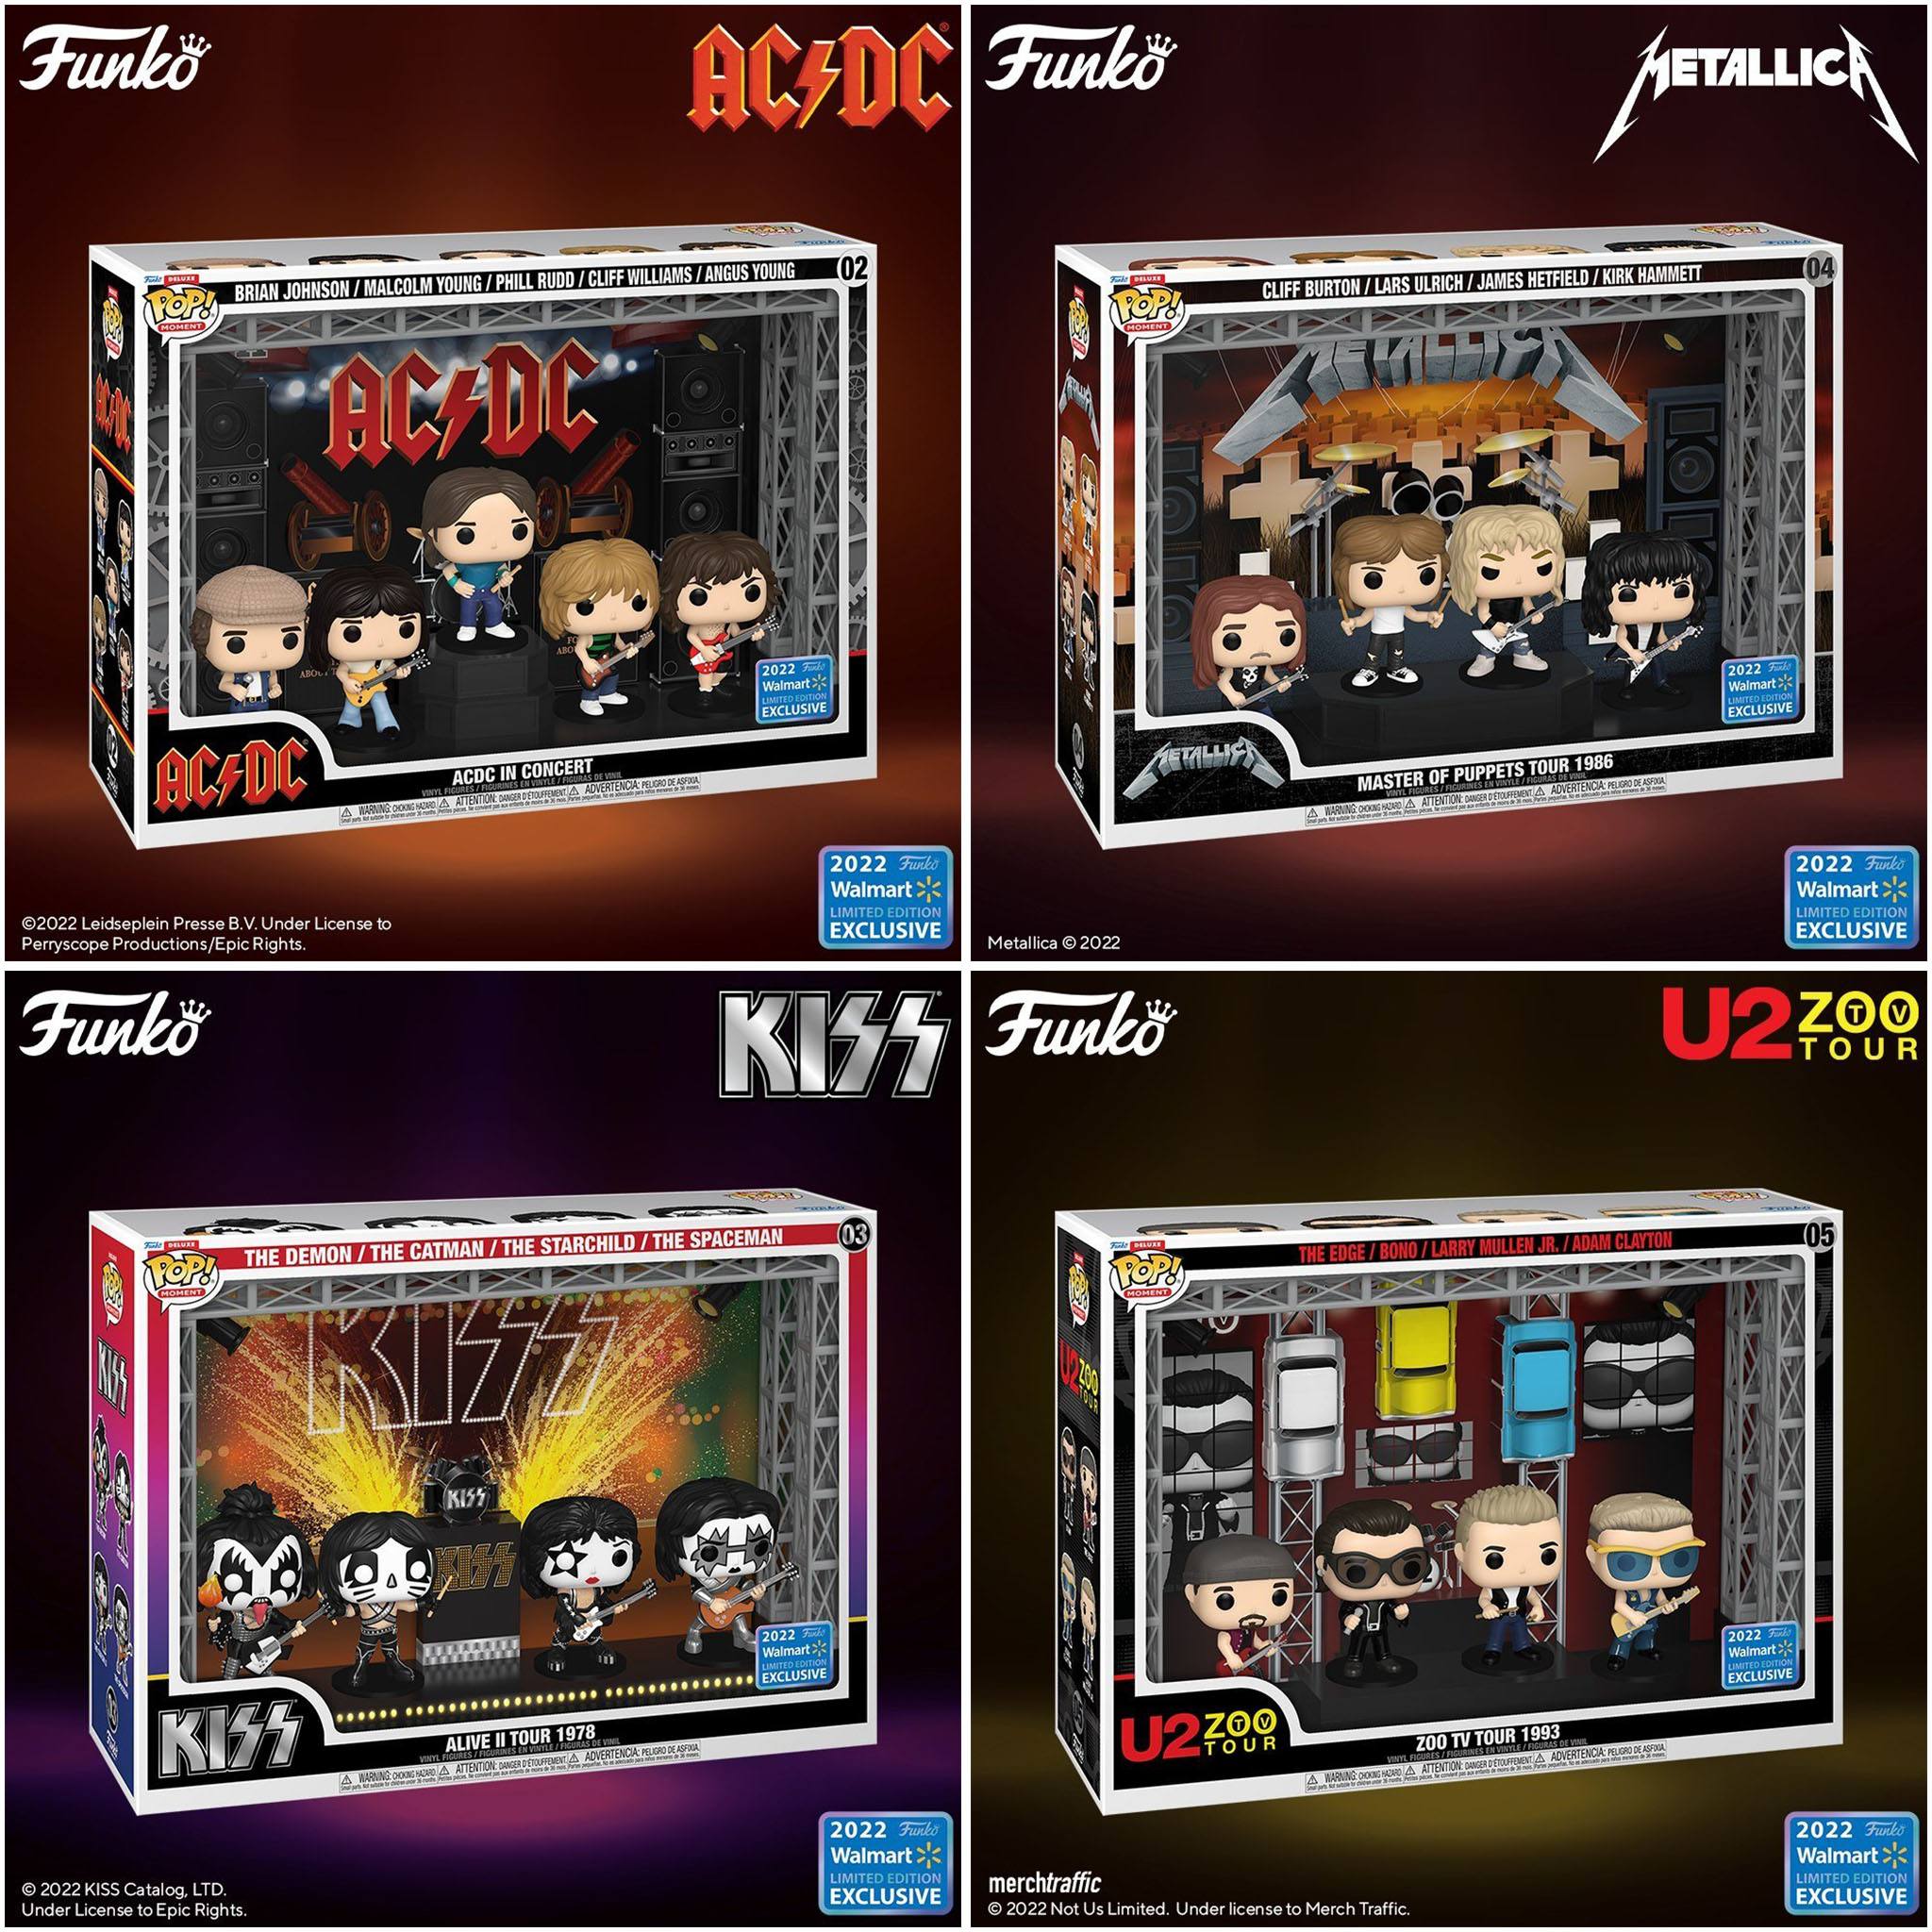 Funko has created a brand new type of POP tribute to concerts